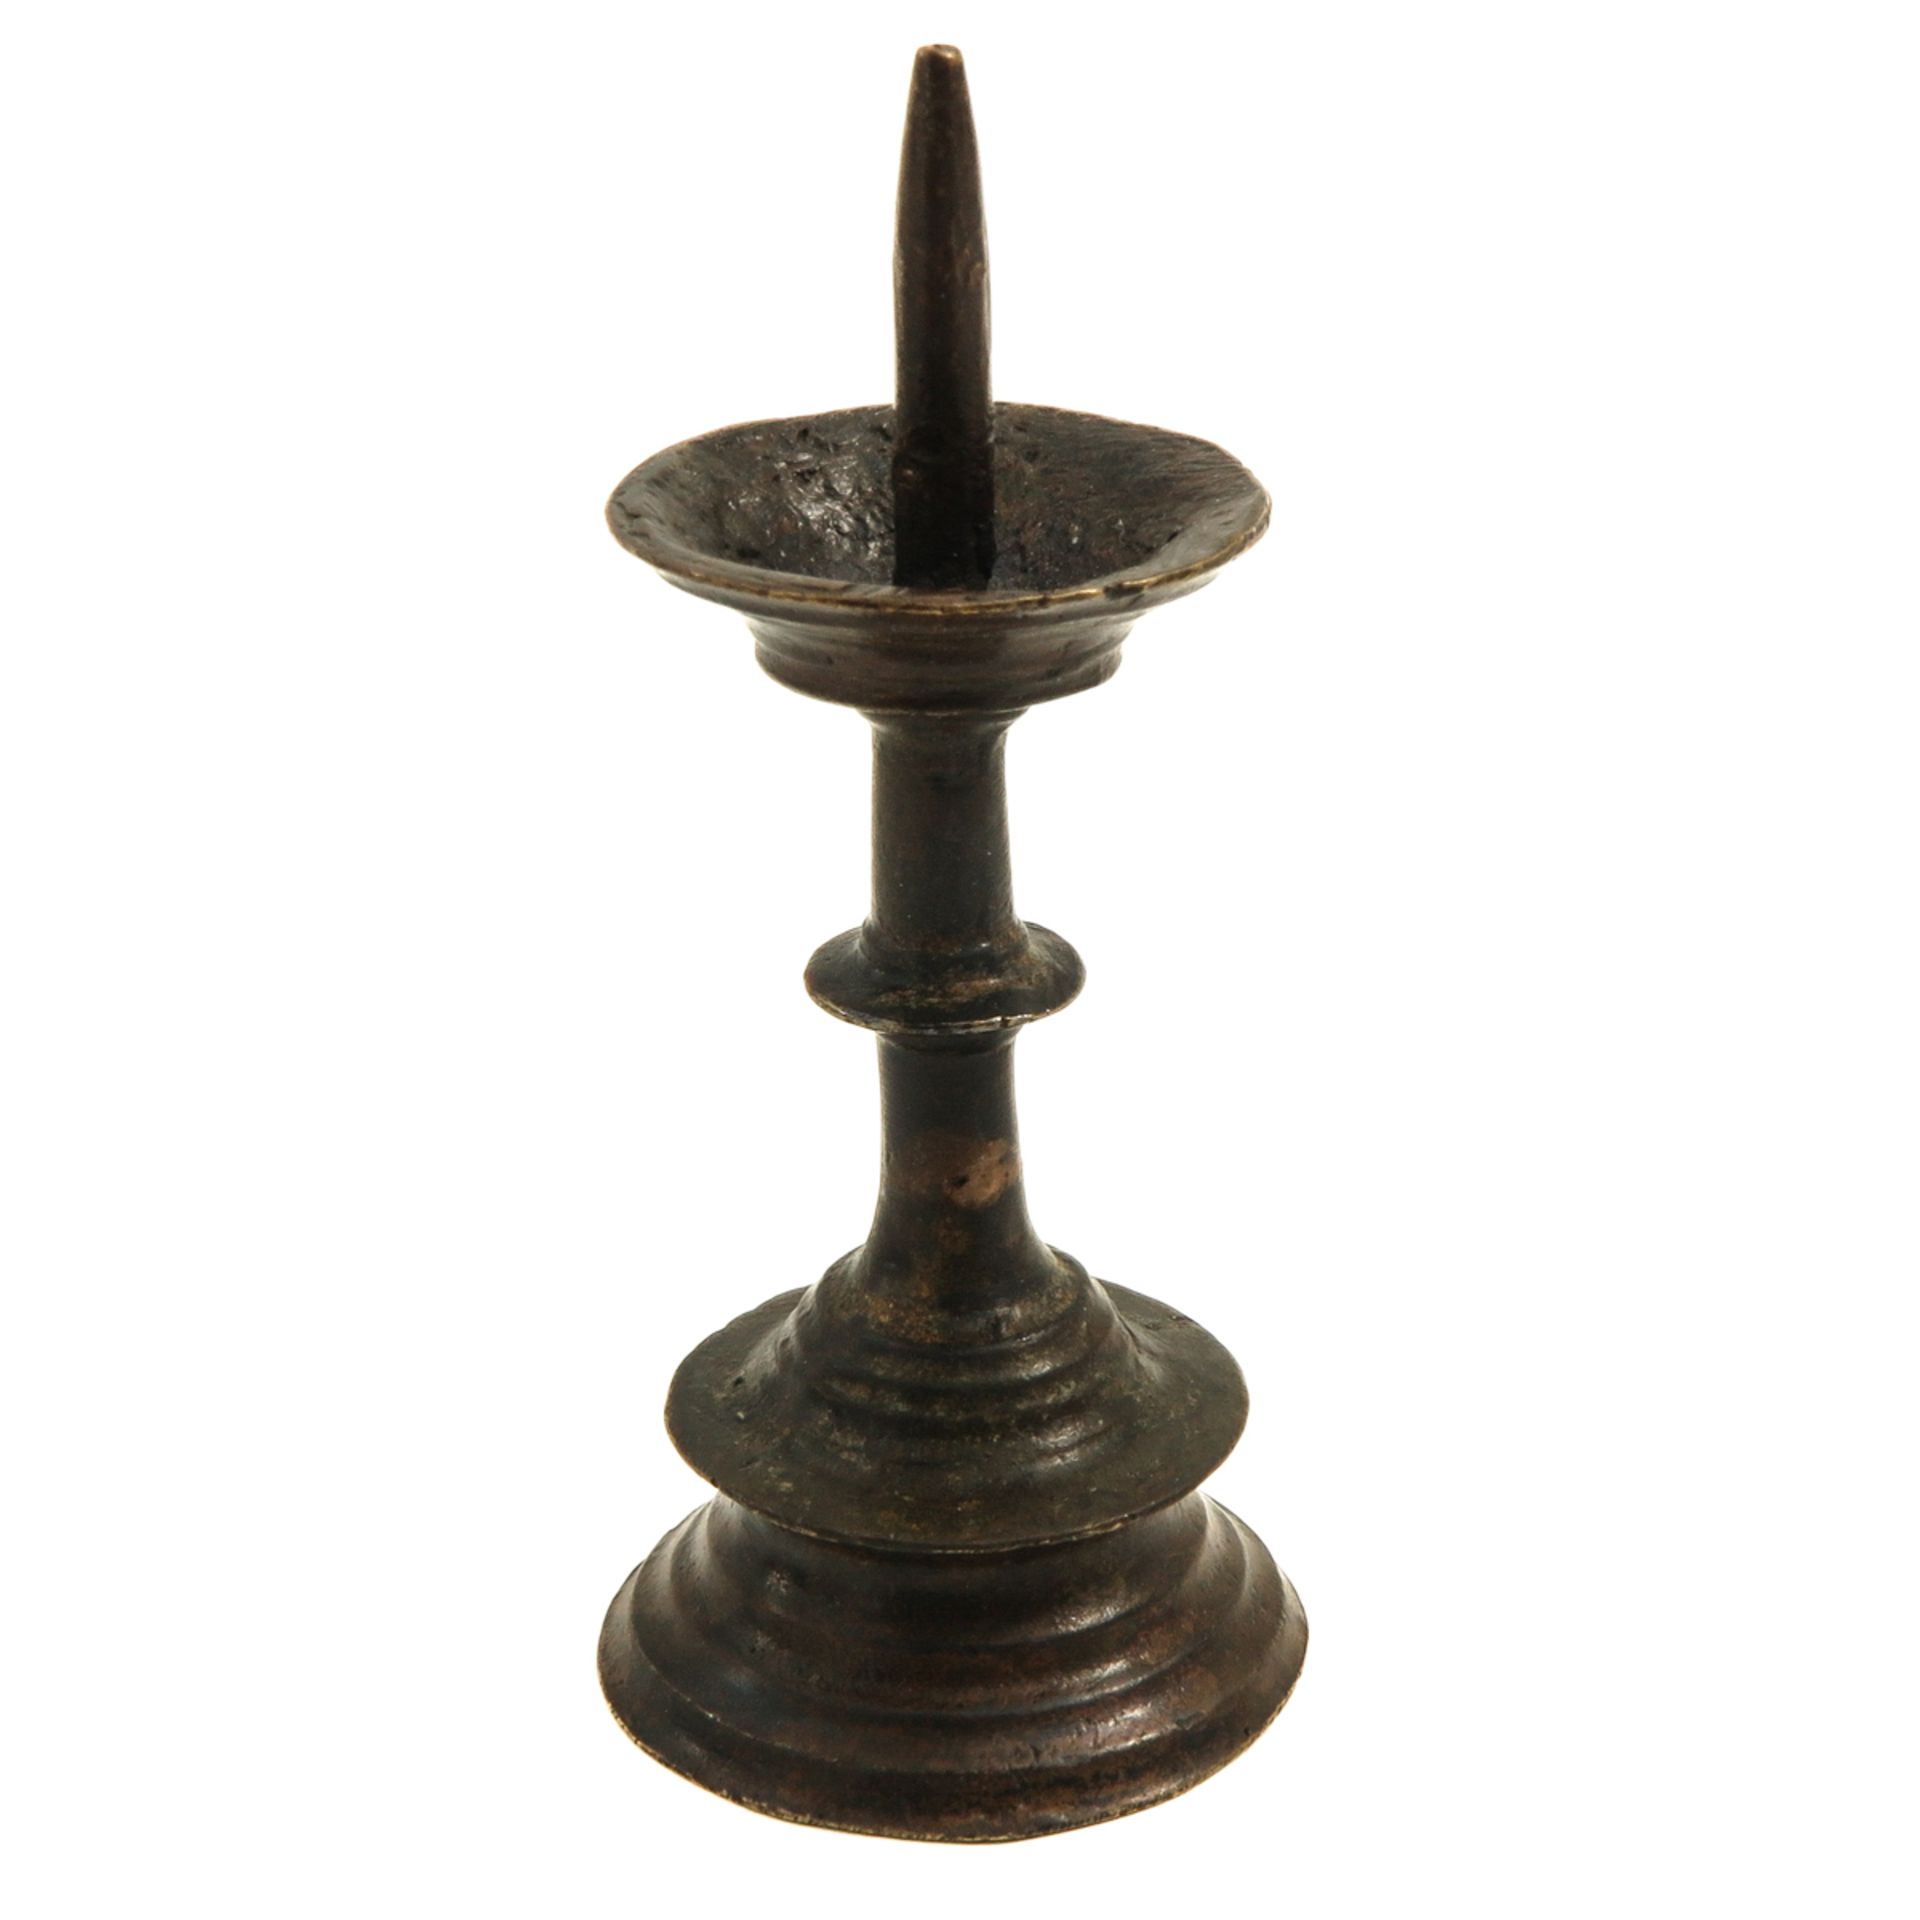 A 16th Century Miniature Candlestick - Image 7 of 7